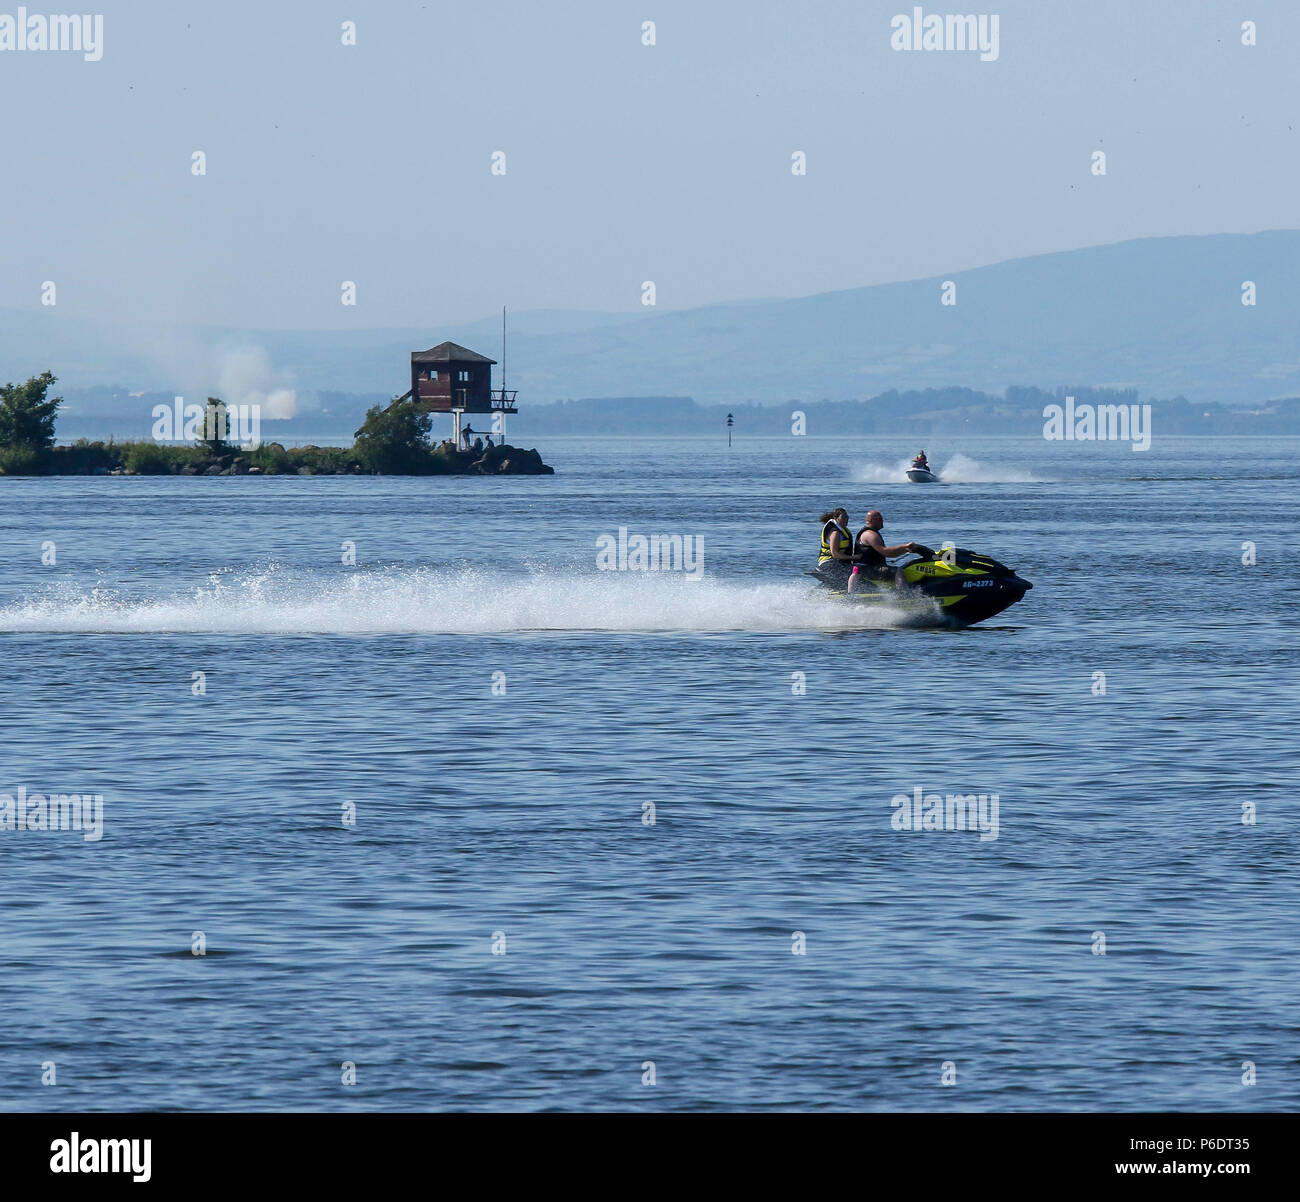 Lough Neagh, Northern Ireland. 29 June 2018. UK weather - another glorious summer day as the heatwave continues. Lough Neagh is the UK's largest freshwater lake and with weather like this it's a great place to enjoy the best summer in decades. Jetskiers on Lough Neagh. Credit: David Hunter/Alamy Live News. Stock Photo